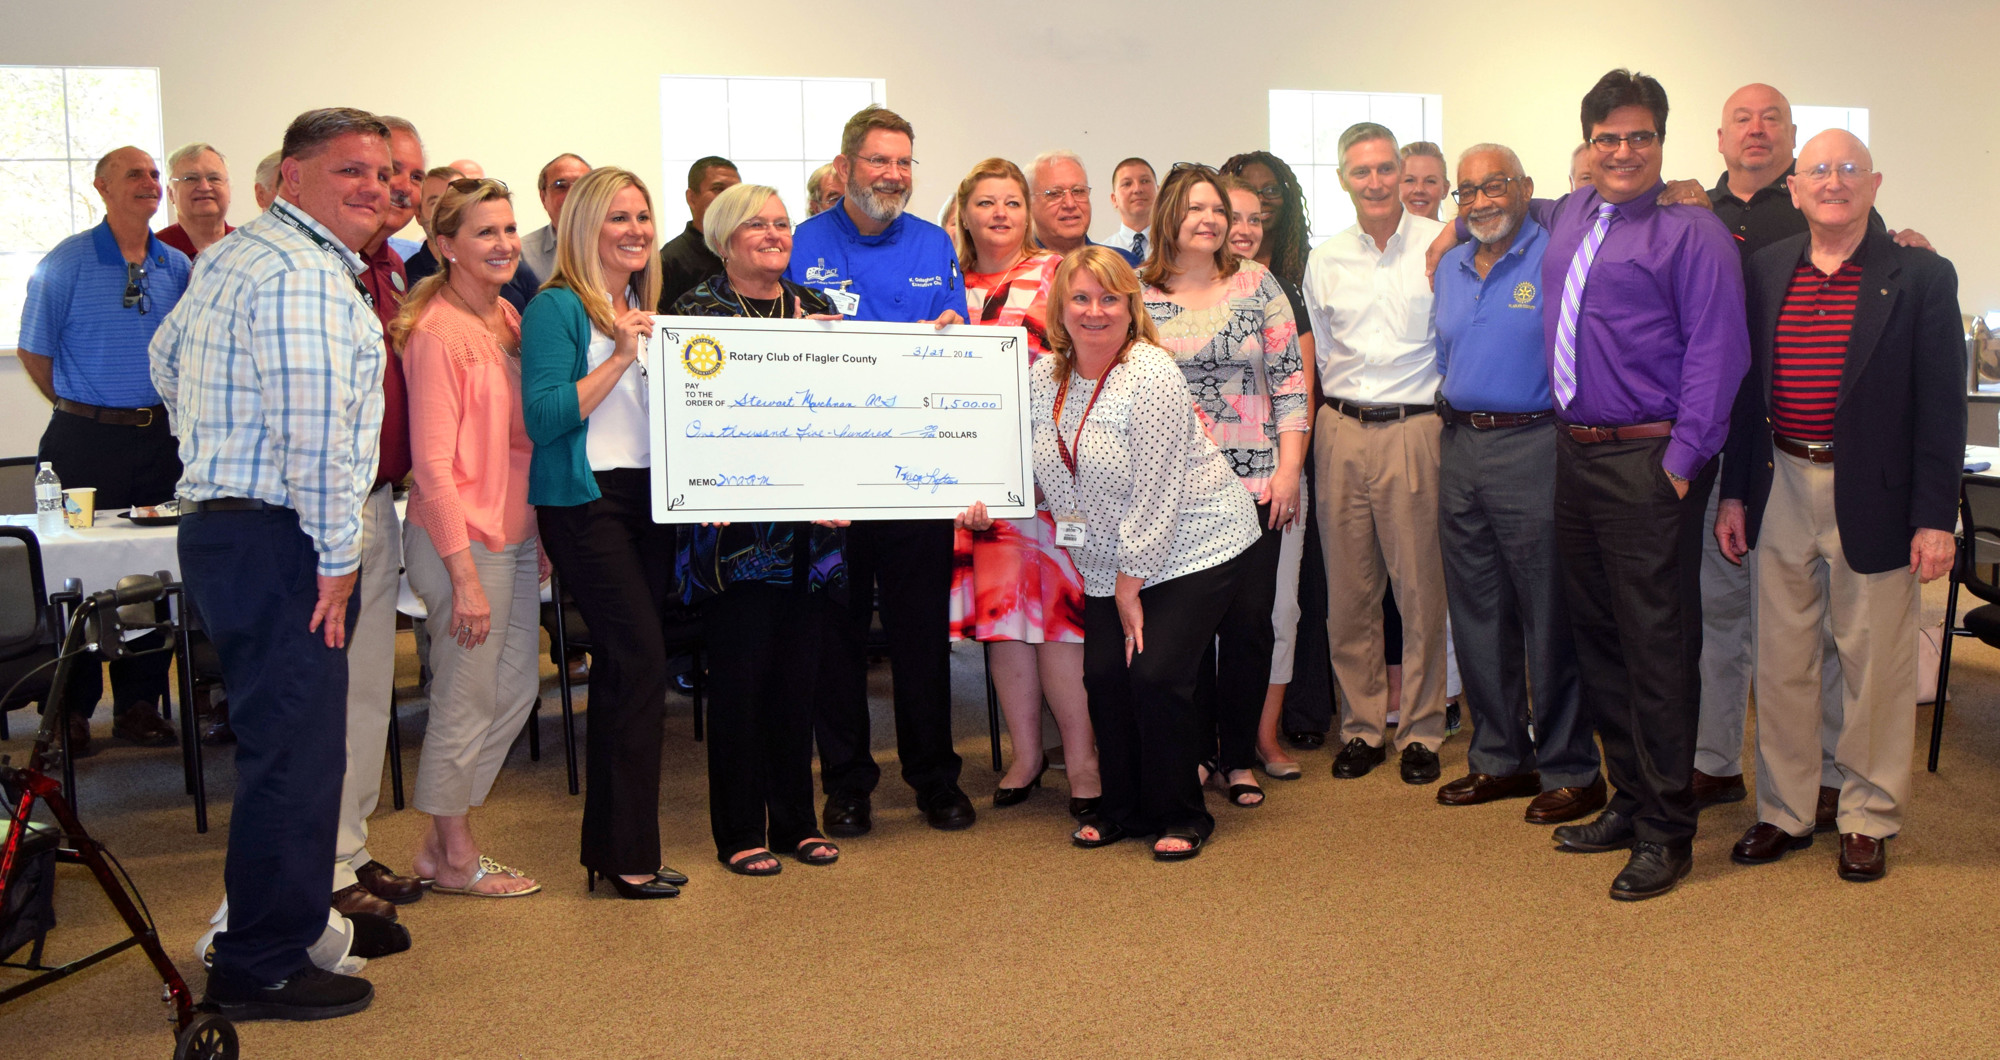 The Rotary Club of Flagler County presented a check for $1,500 to Stewart Marchman to support their Culinary Program at the Women Assisting Recovering Mothers Residential Community. Photo courtesy of Cindy Evans